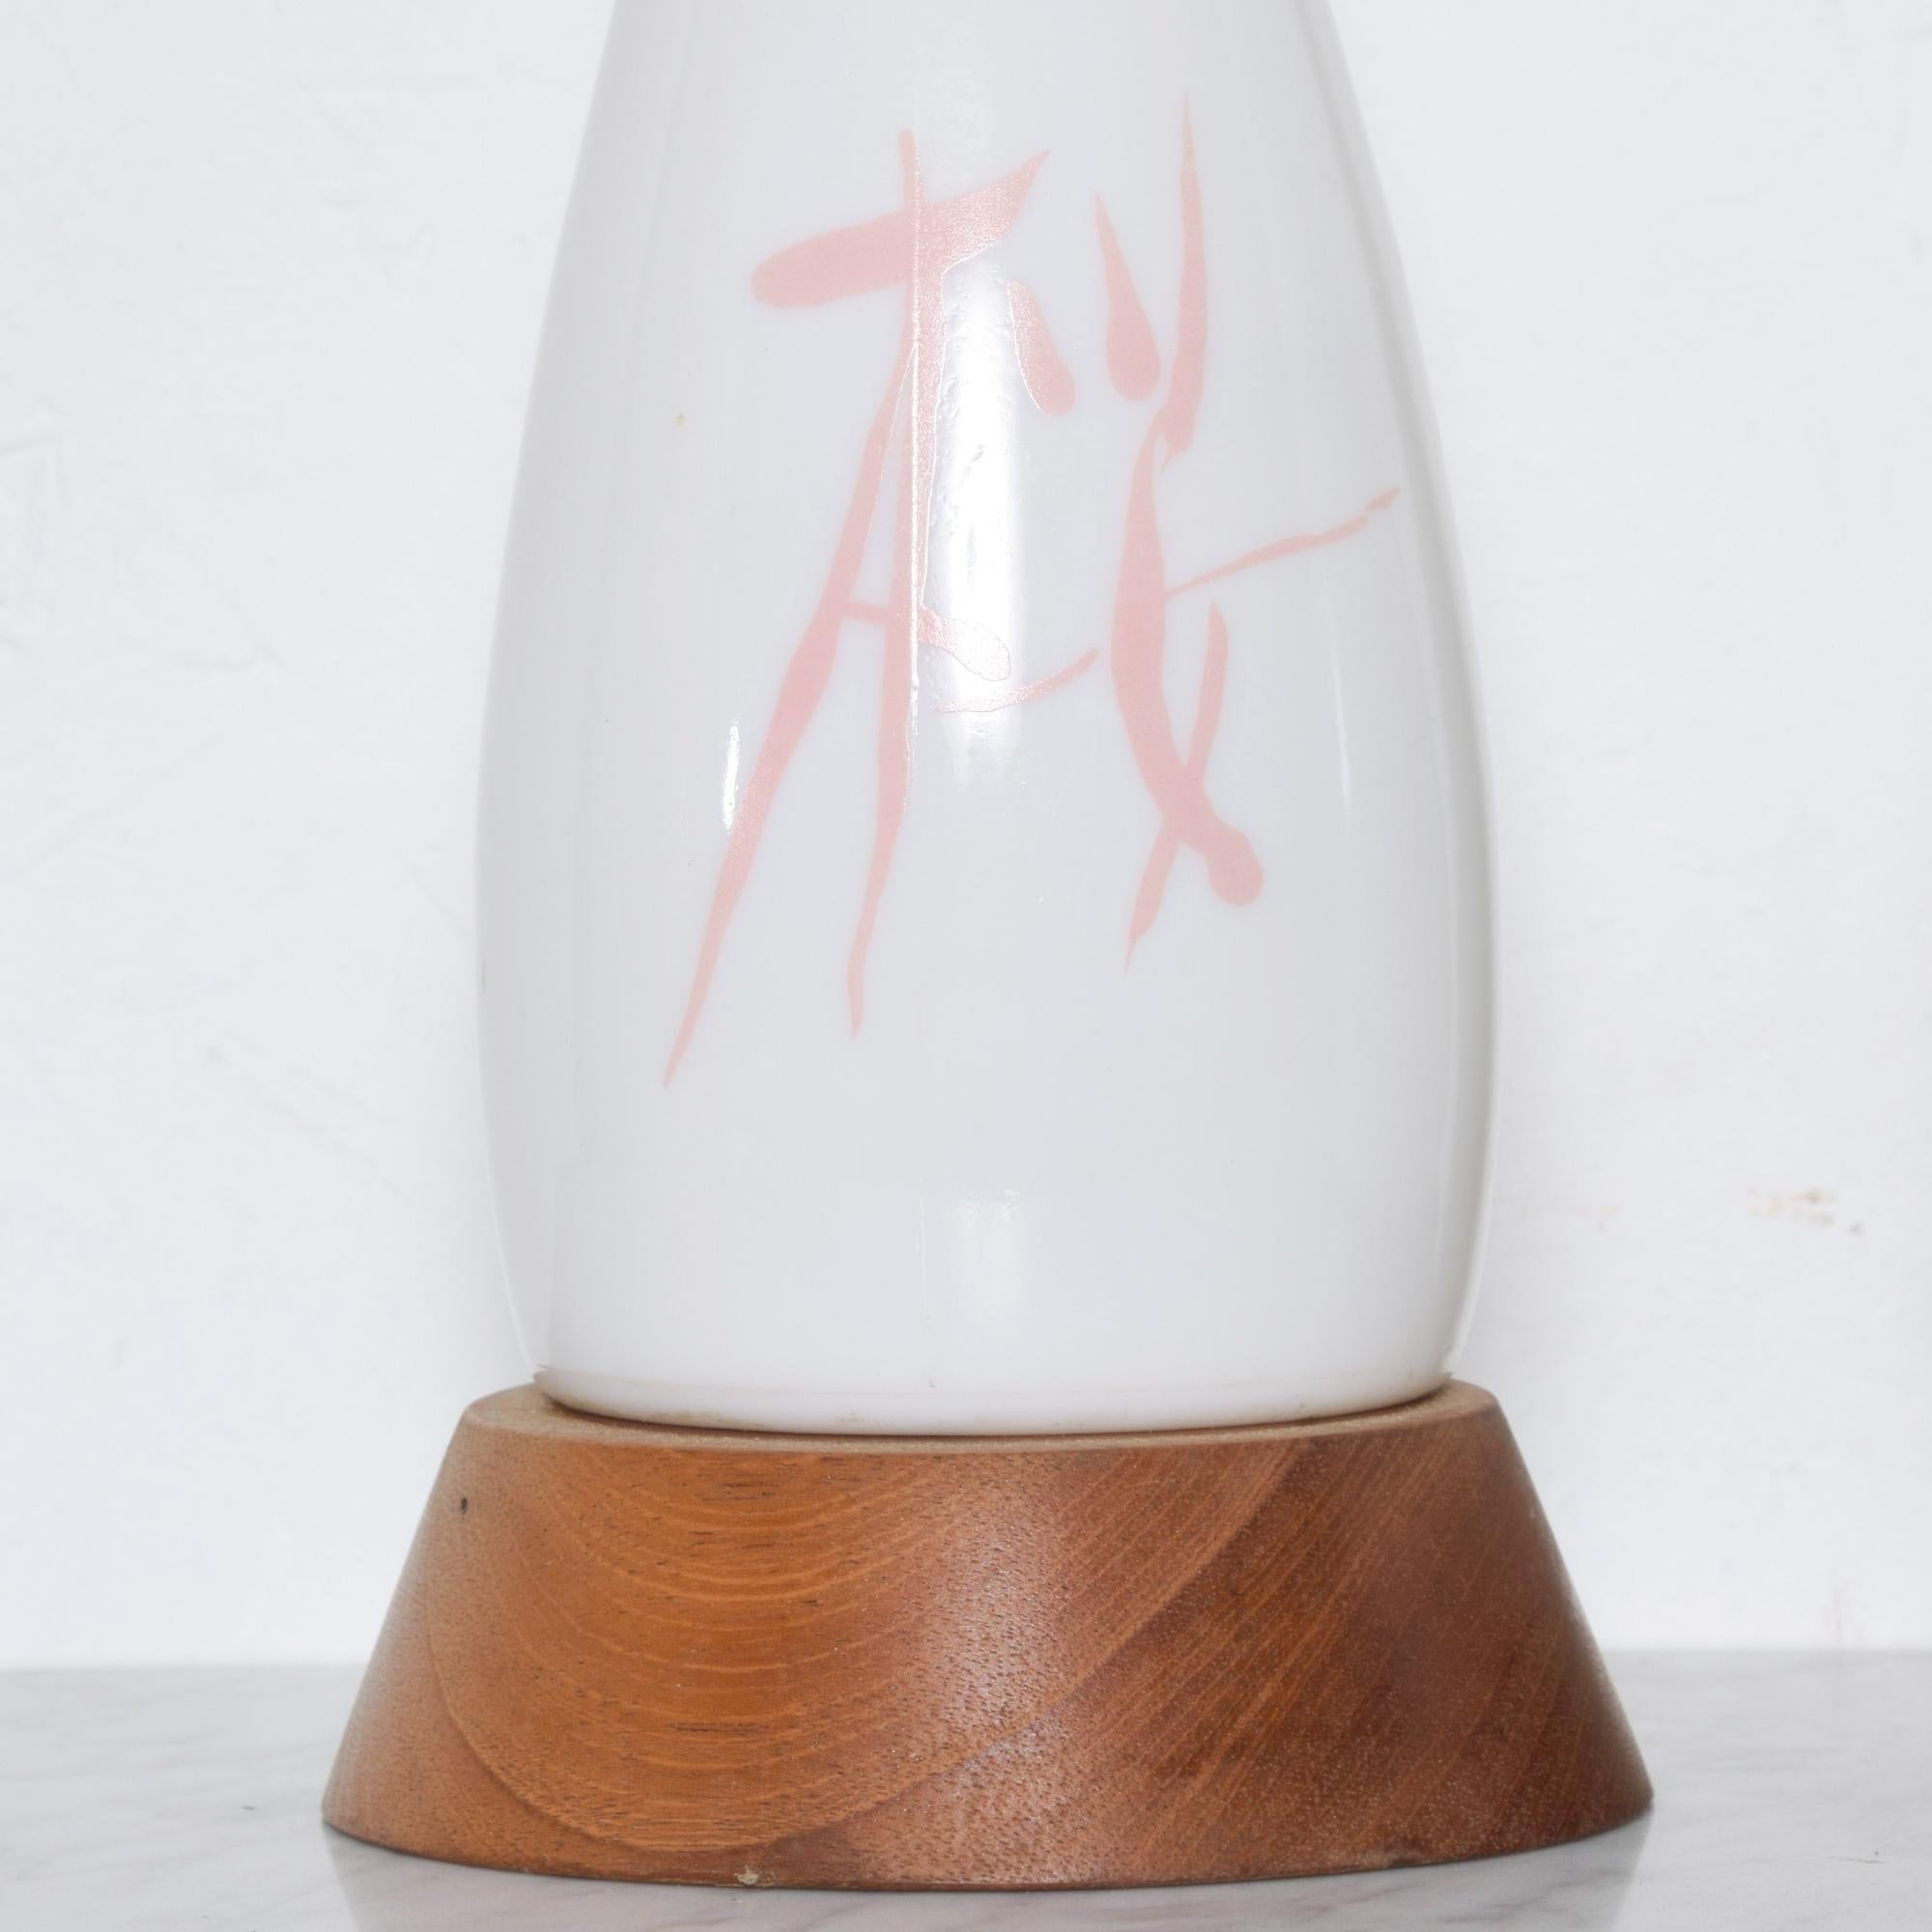 Set of two modernist lamps in creamy milk glass Asian motif table lamps mounted on a modern wood base.
No additional maker information is available.
Features Chinese symbol writing on design
Dimensions: 16 tall x 5 inches in diameter